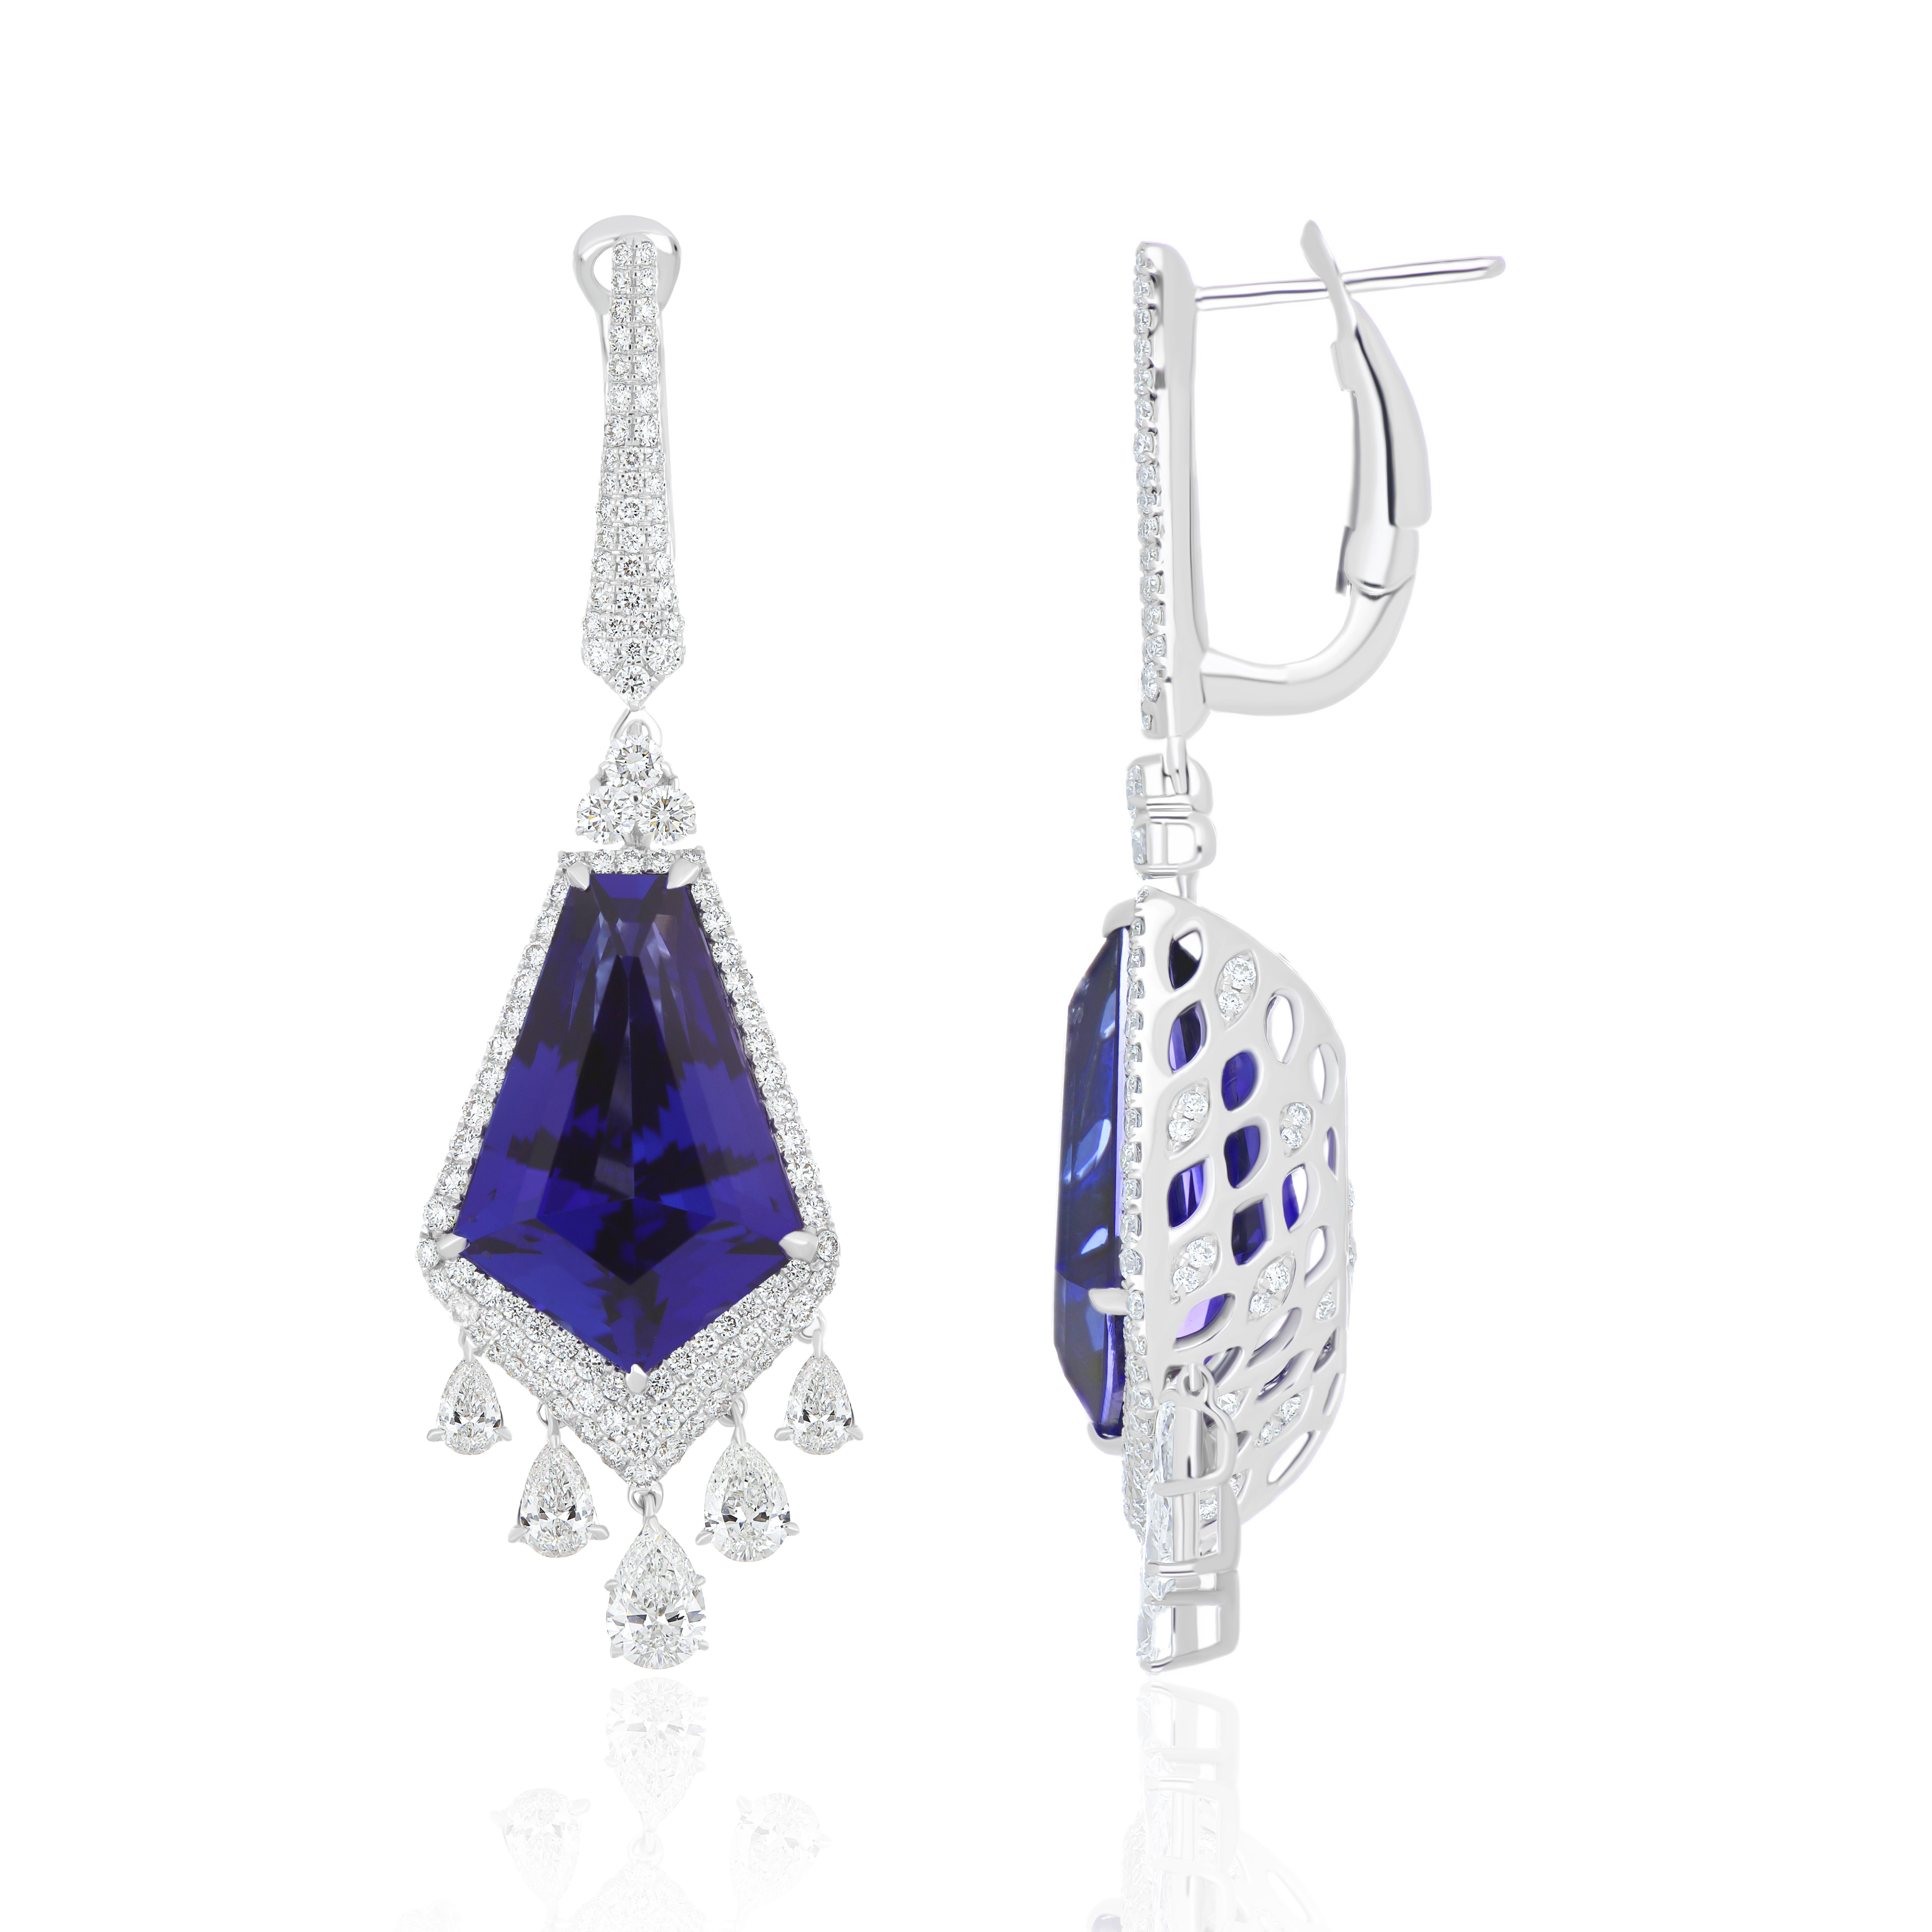 Elegant and Exquisitely detailed White Gold Earring, with 26.5 Cts (approx) Tanzanite Exquisitely cut in Fancy Shape accented with micro pave Diamonds, weighing approx. 4.00 Ct's.(approx) total carat weight. Beautifully Hand-Crafted fro your special